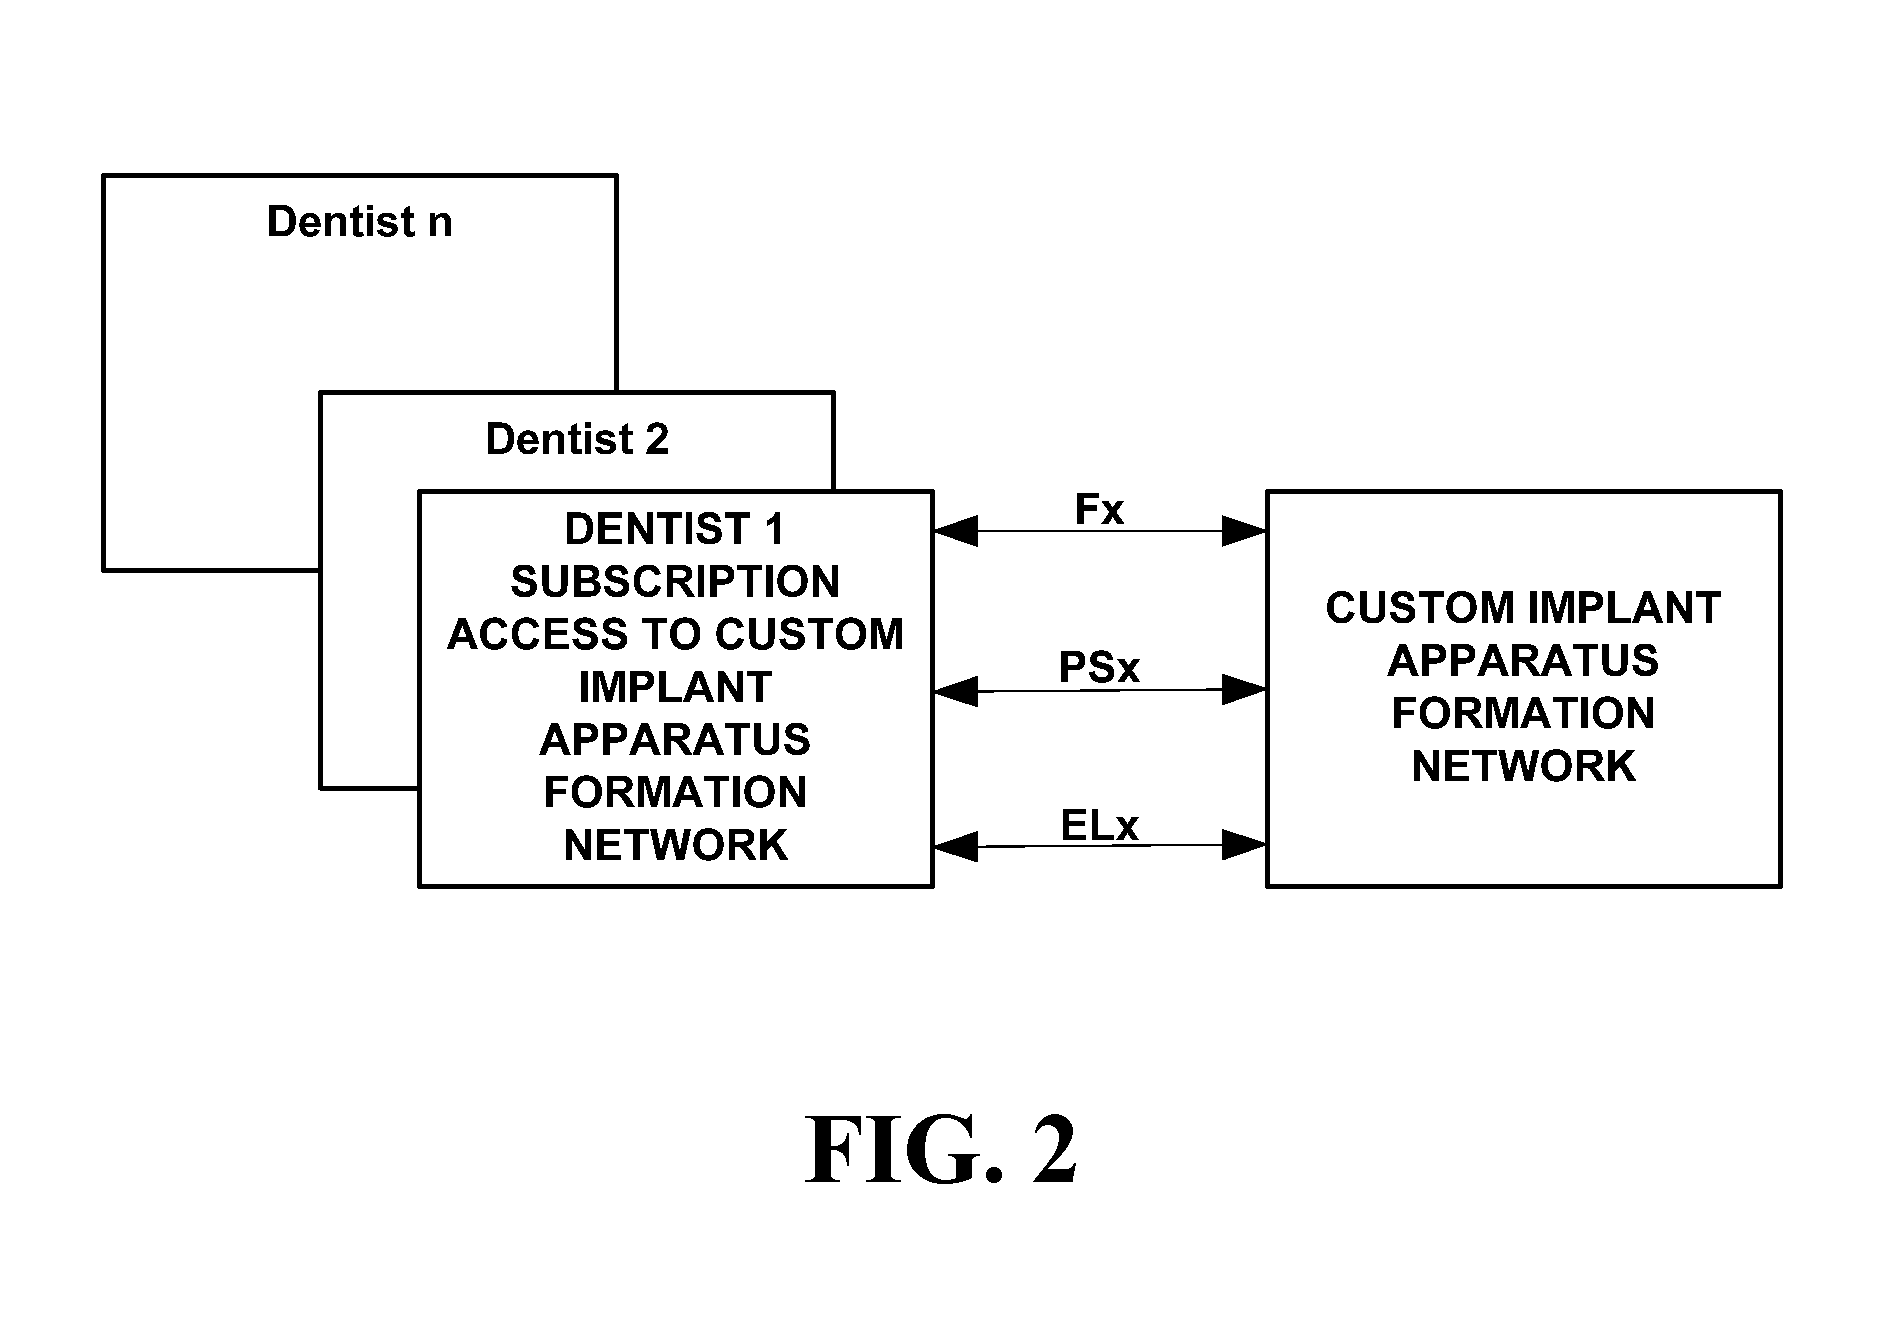 System & method for the design, creation and installation of implant-supported dental prostheses